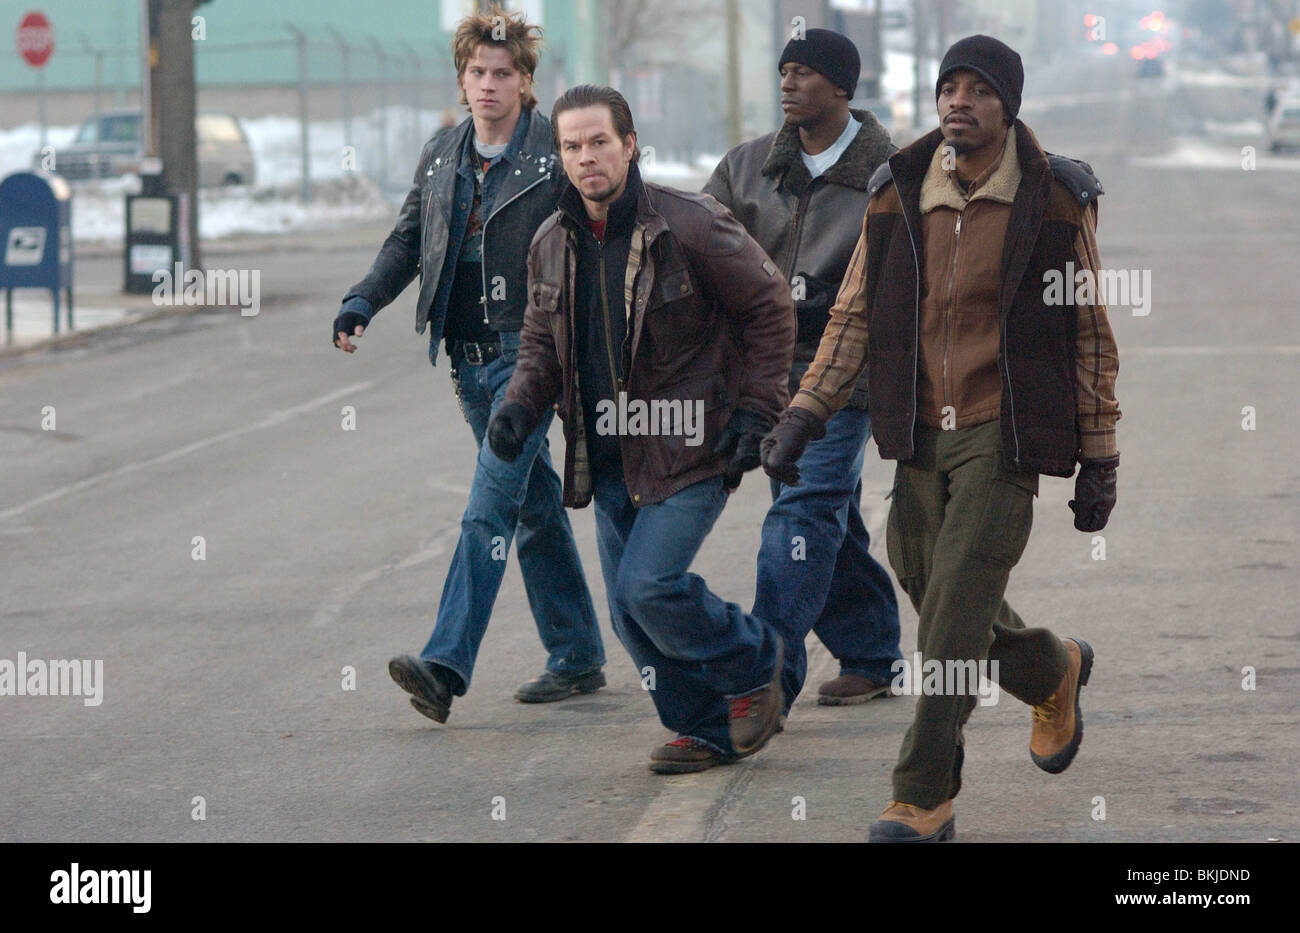 FOUR BROTHERS (2005) GARRETT HEDLUND, MARK WAHLBERG, TYRESE GIBSON, ANDRE BENJAMIN FBRO 001-01 Stock Photo